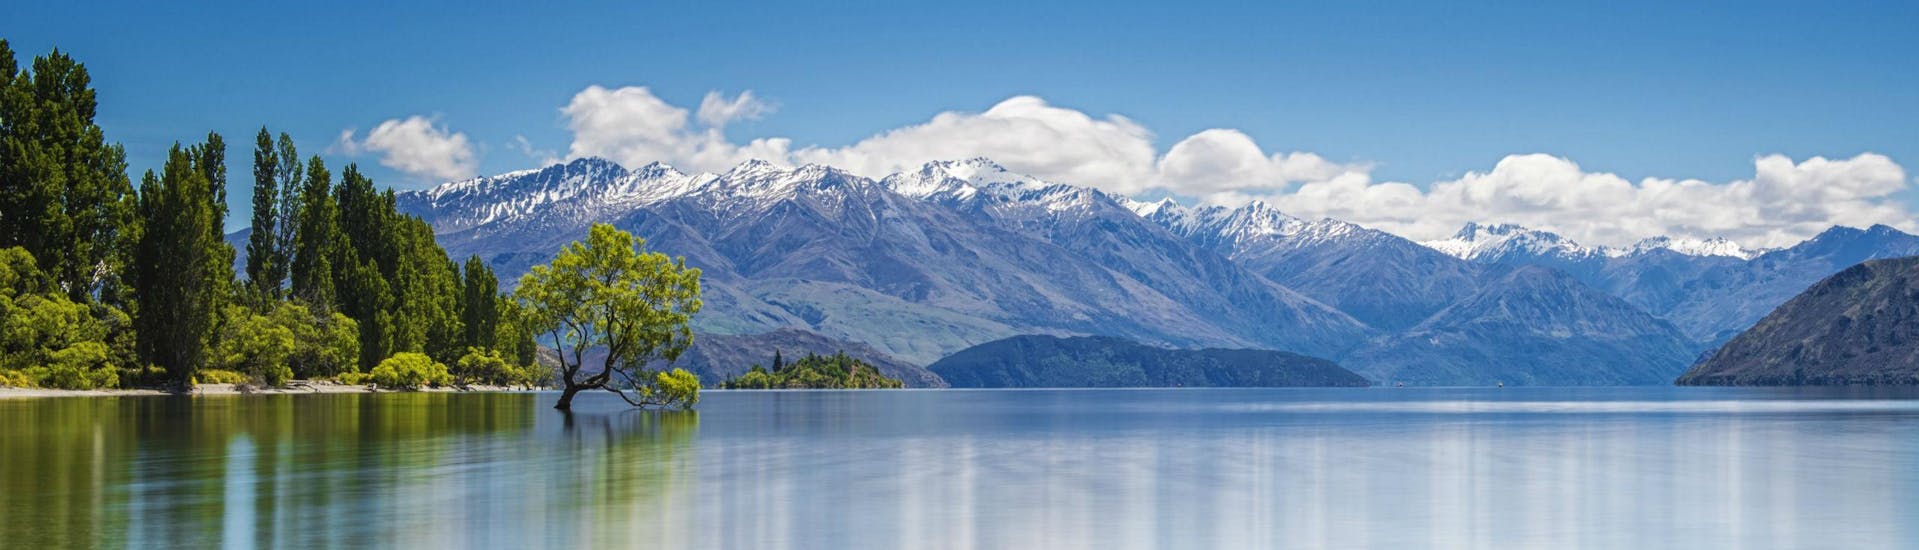 A view of the calm and peaceful waters of Lake Wanaka and the stunning scenery around it, as can be seen on a boat trip in Wanaka.